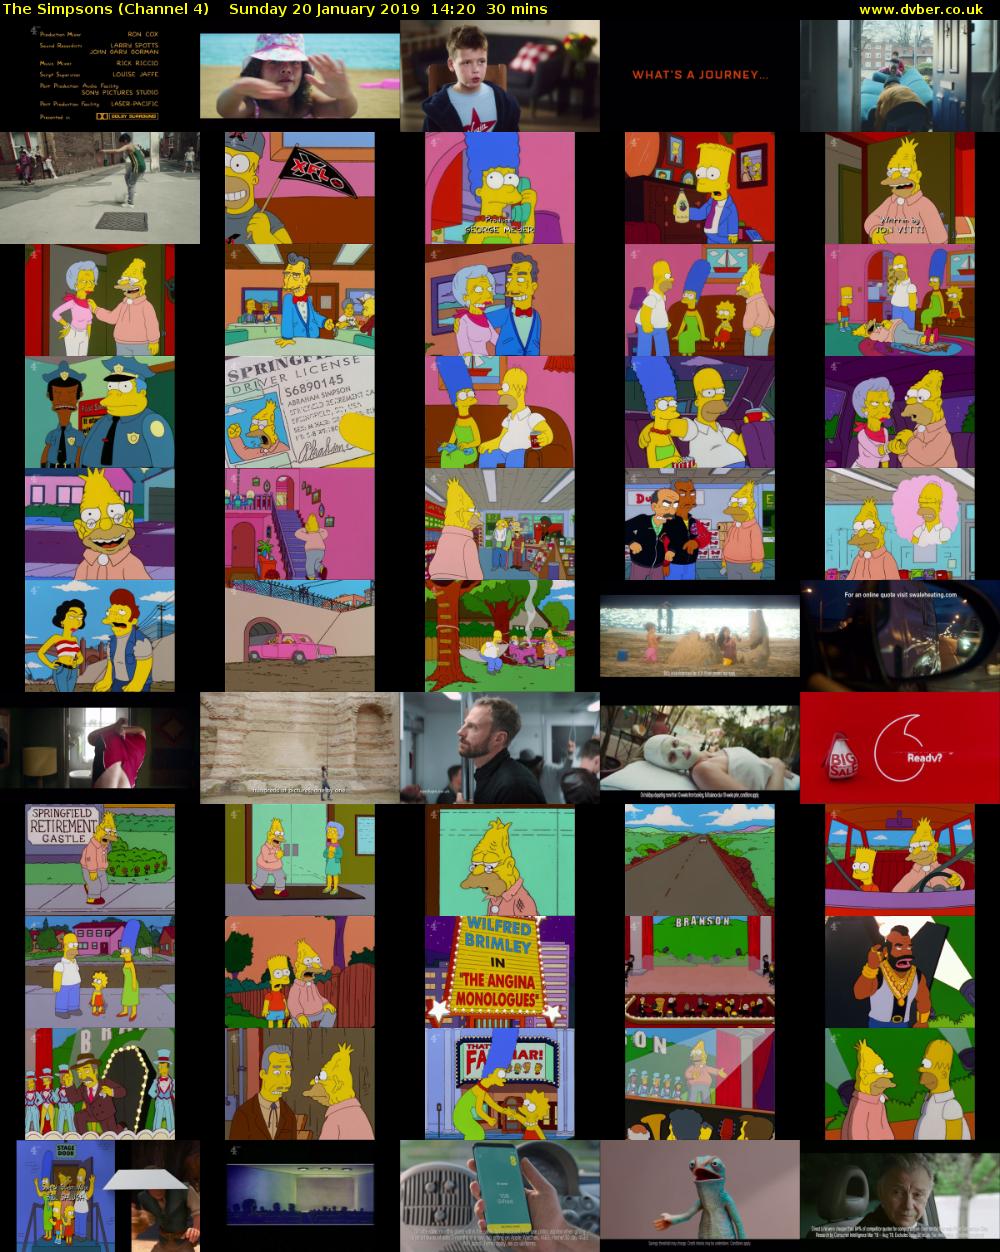 The Simpsons (Channel 4) Sunday 20 January 2019 14:20 - 14:50